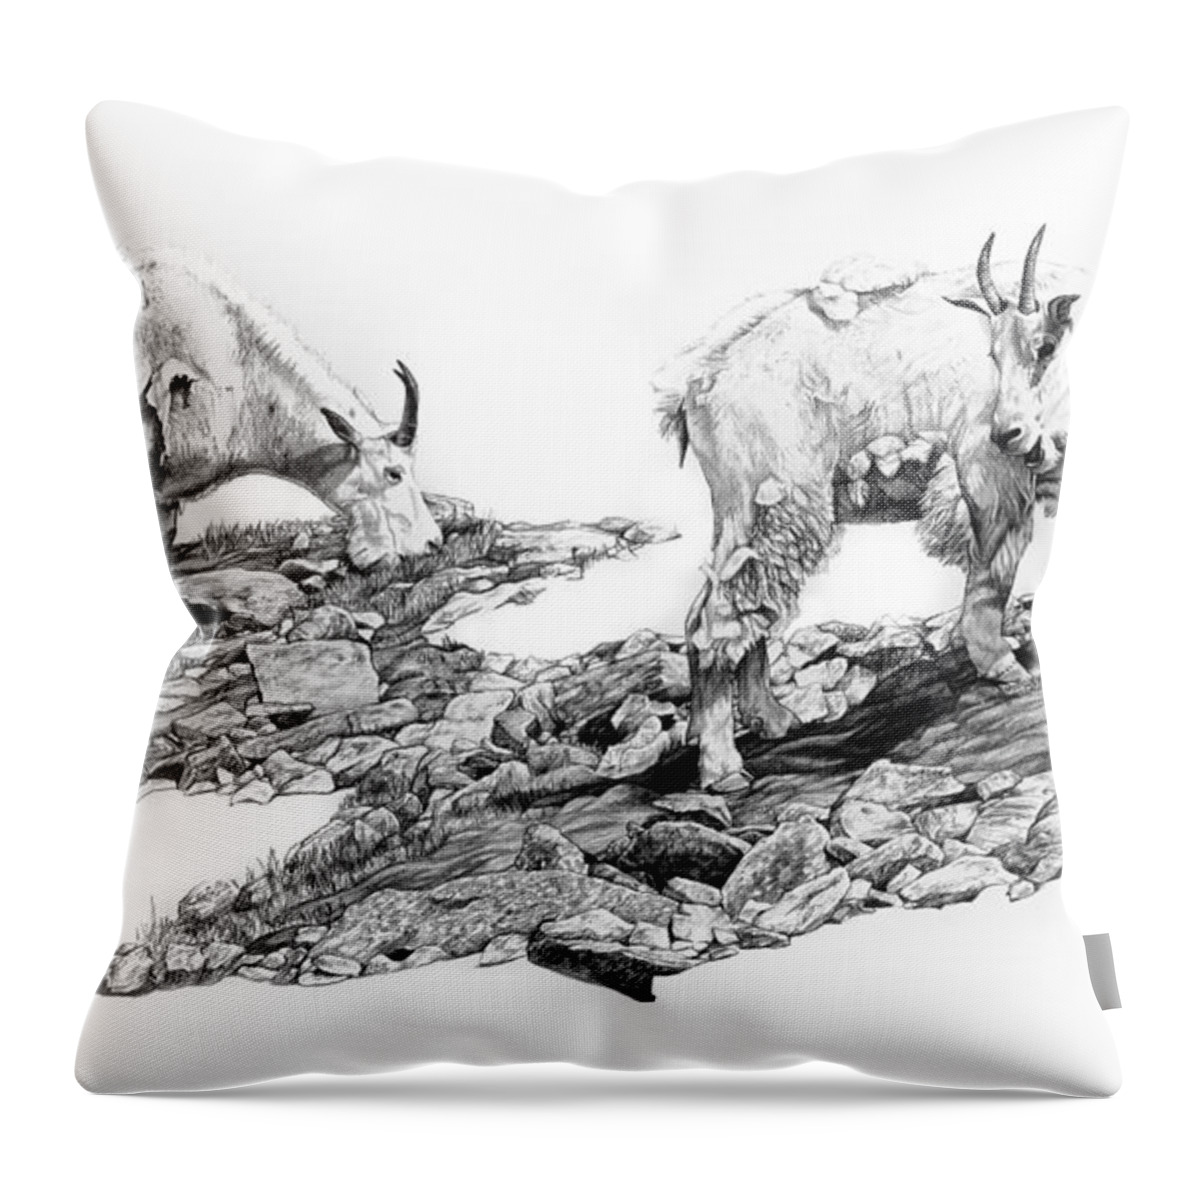 Goat Throw Pillow featuring the painting Grazing by Aaron Spong